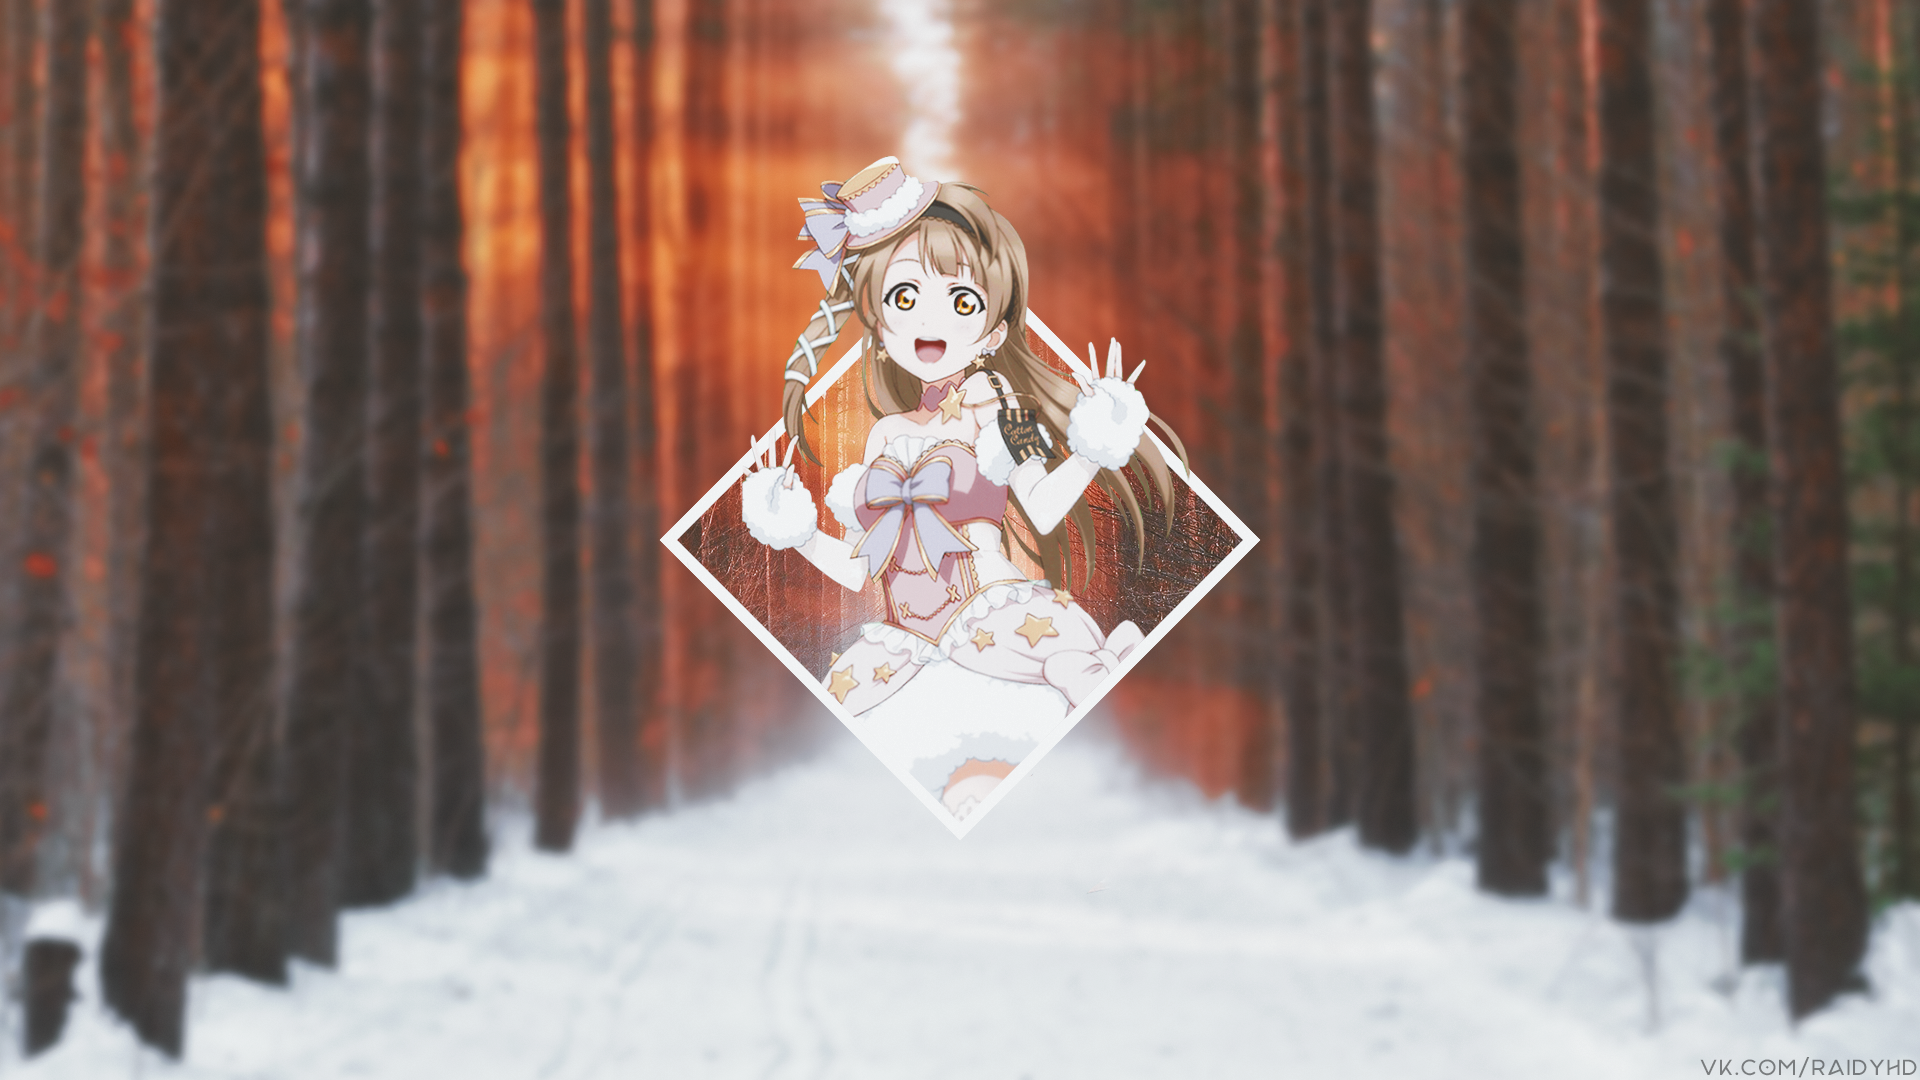 Anime 1920x1080 anime anime girls picture-in-picture Minami Kotori Love Live! Love Live! Sunshine watermarked